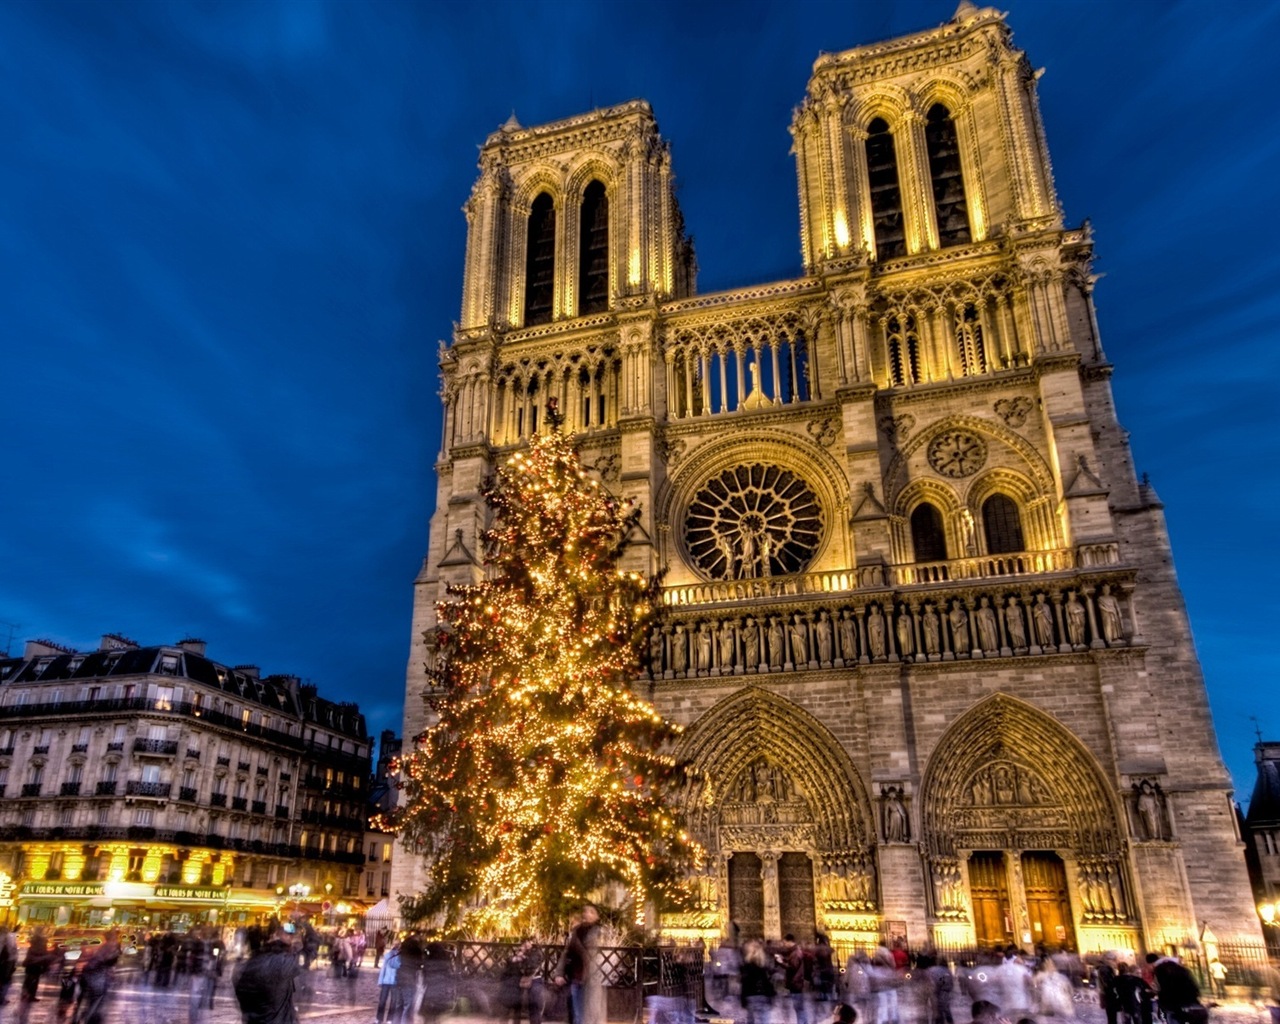 Notre Dame HD Wallpapers #7 - 1280x1024